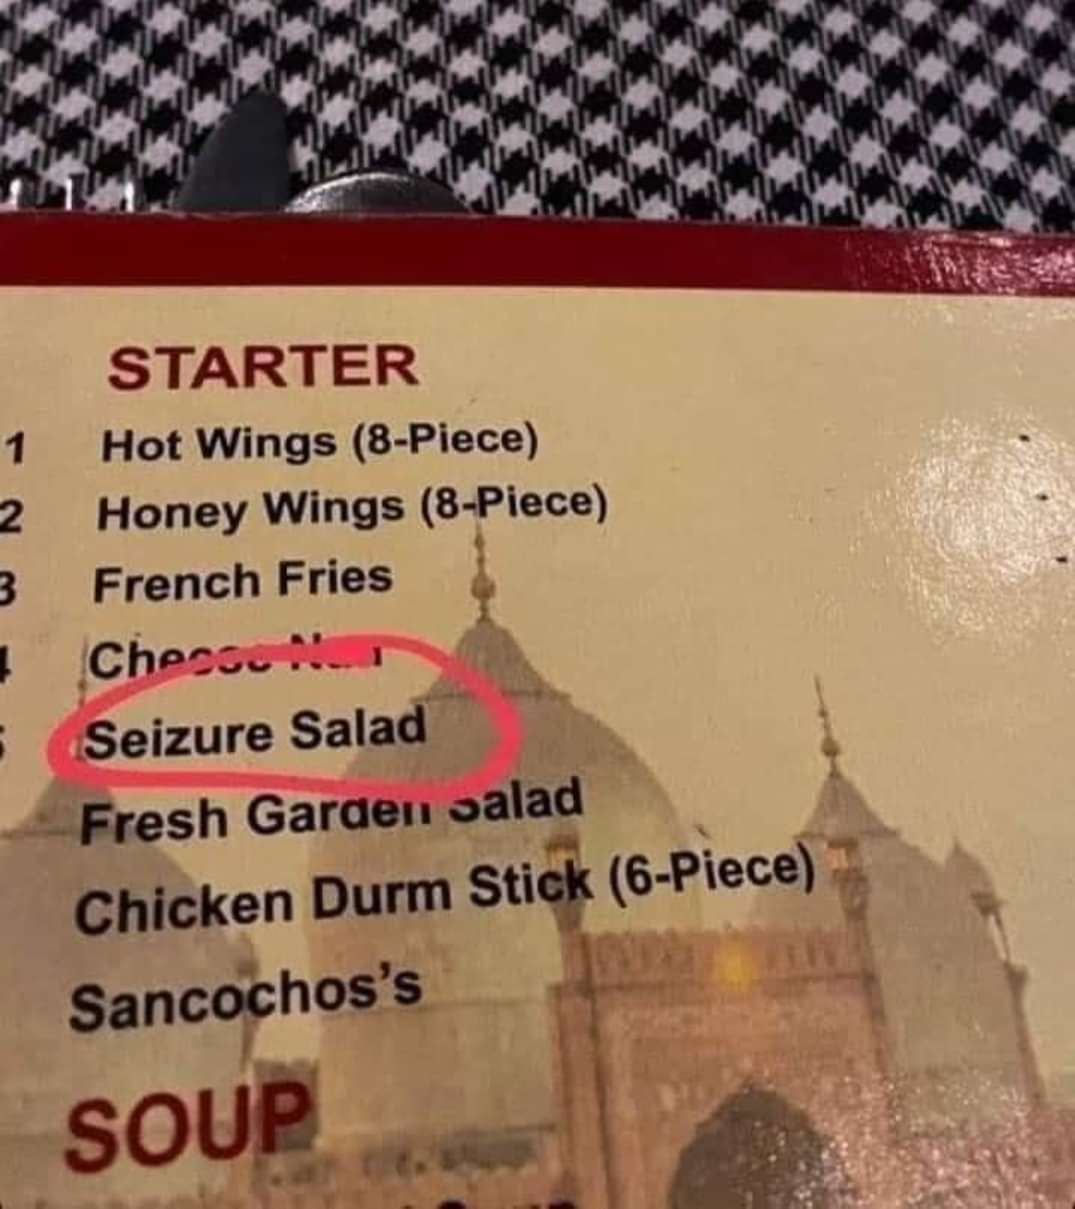 hey guys, I'm thinking about getting the SEIZURE salad. wonder what's going to happen